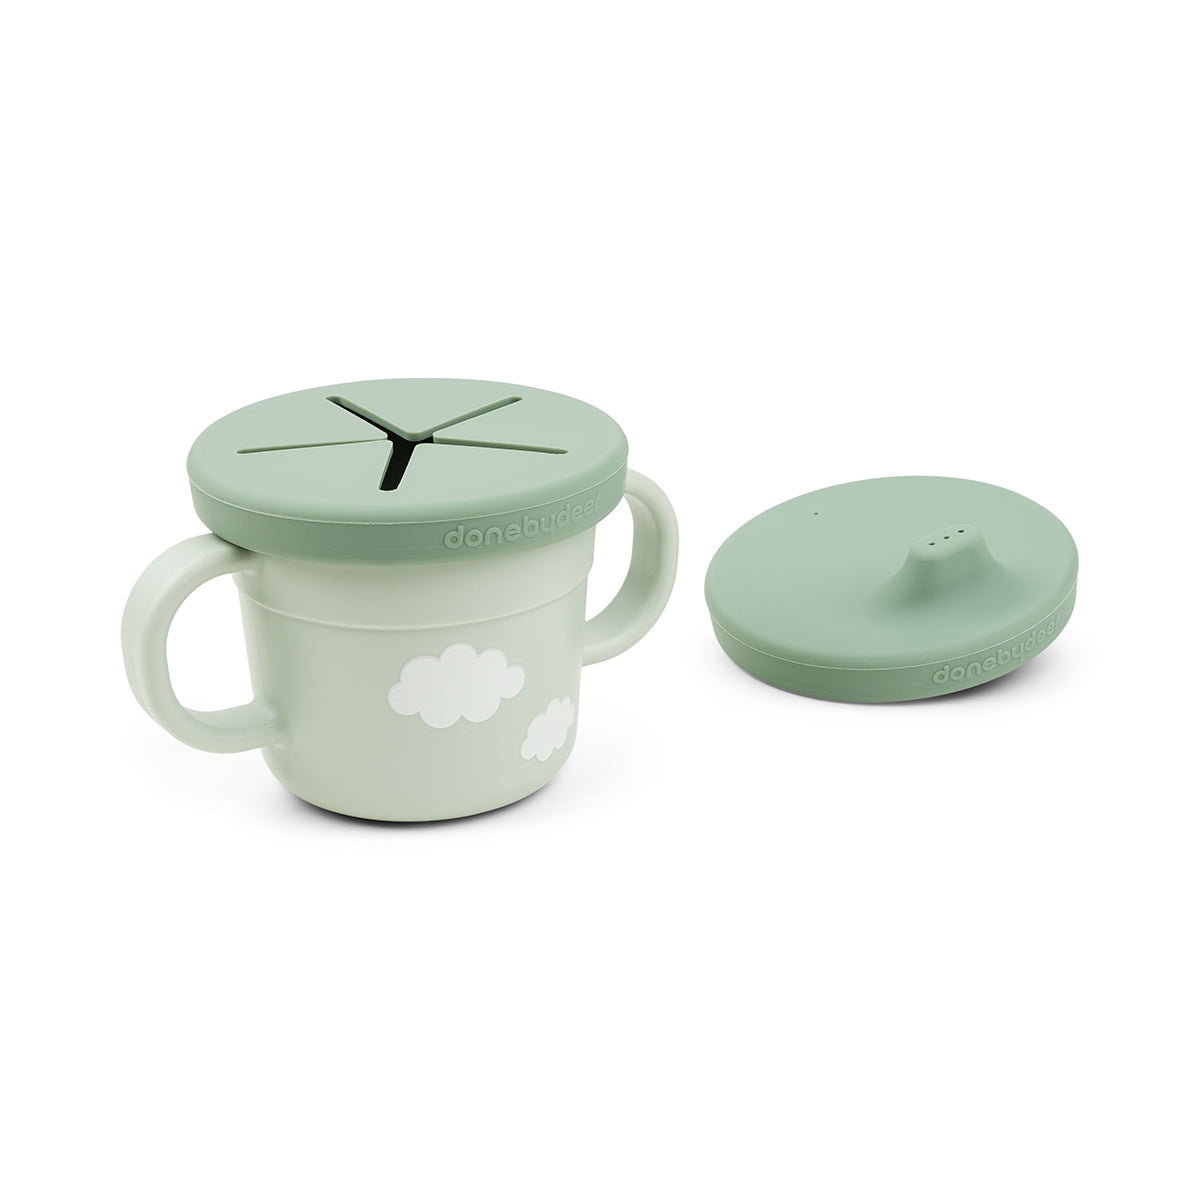 Foodie spout/snack cup - Croco - Green